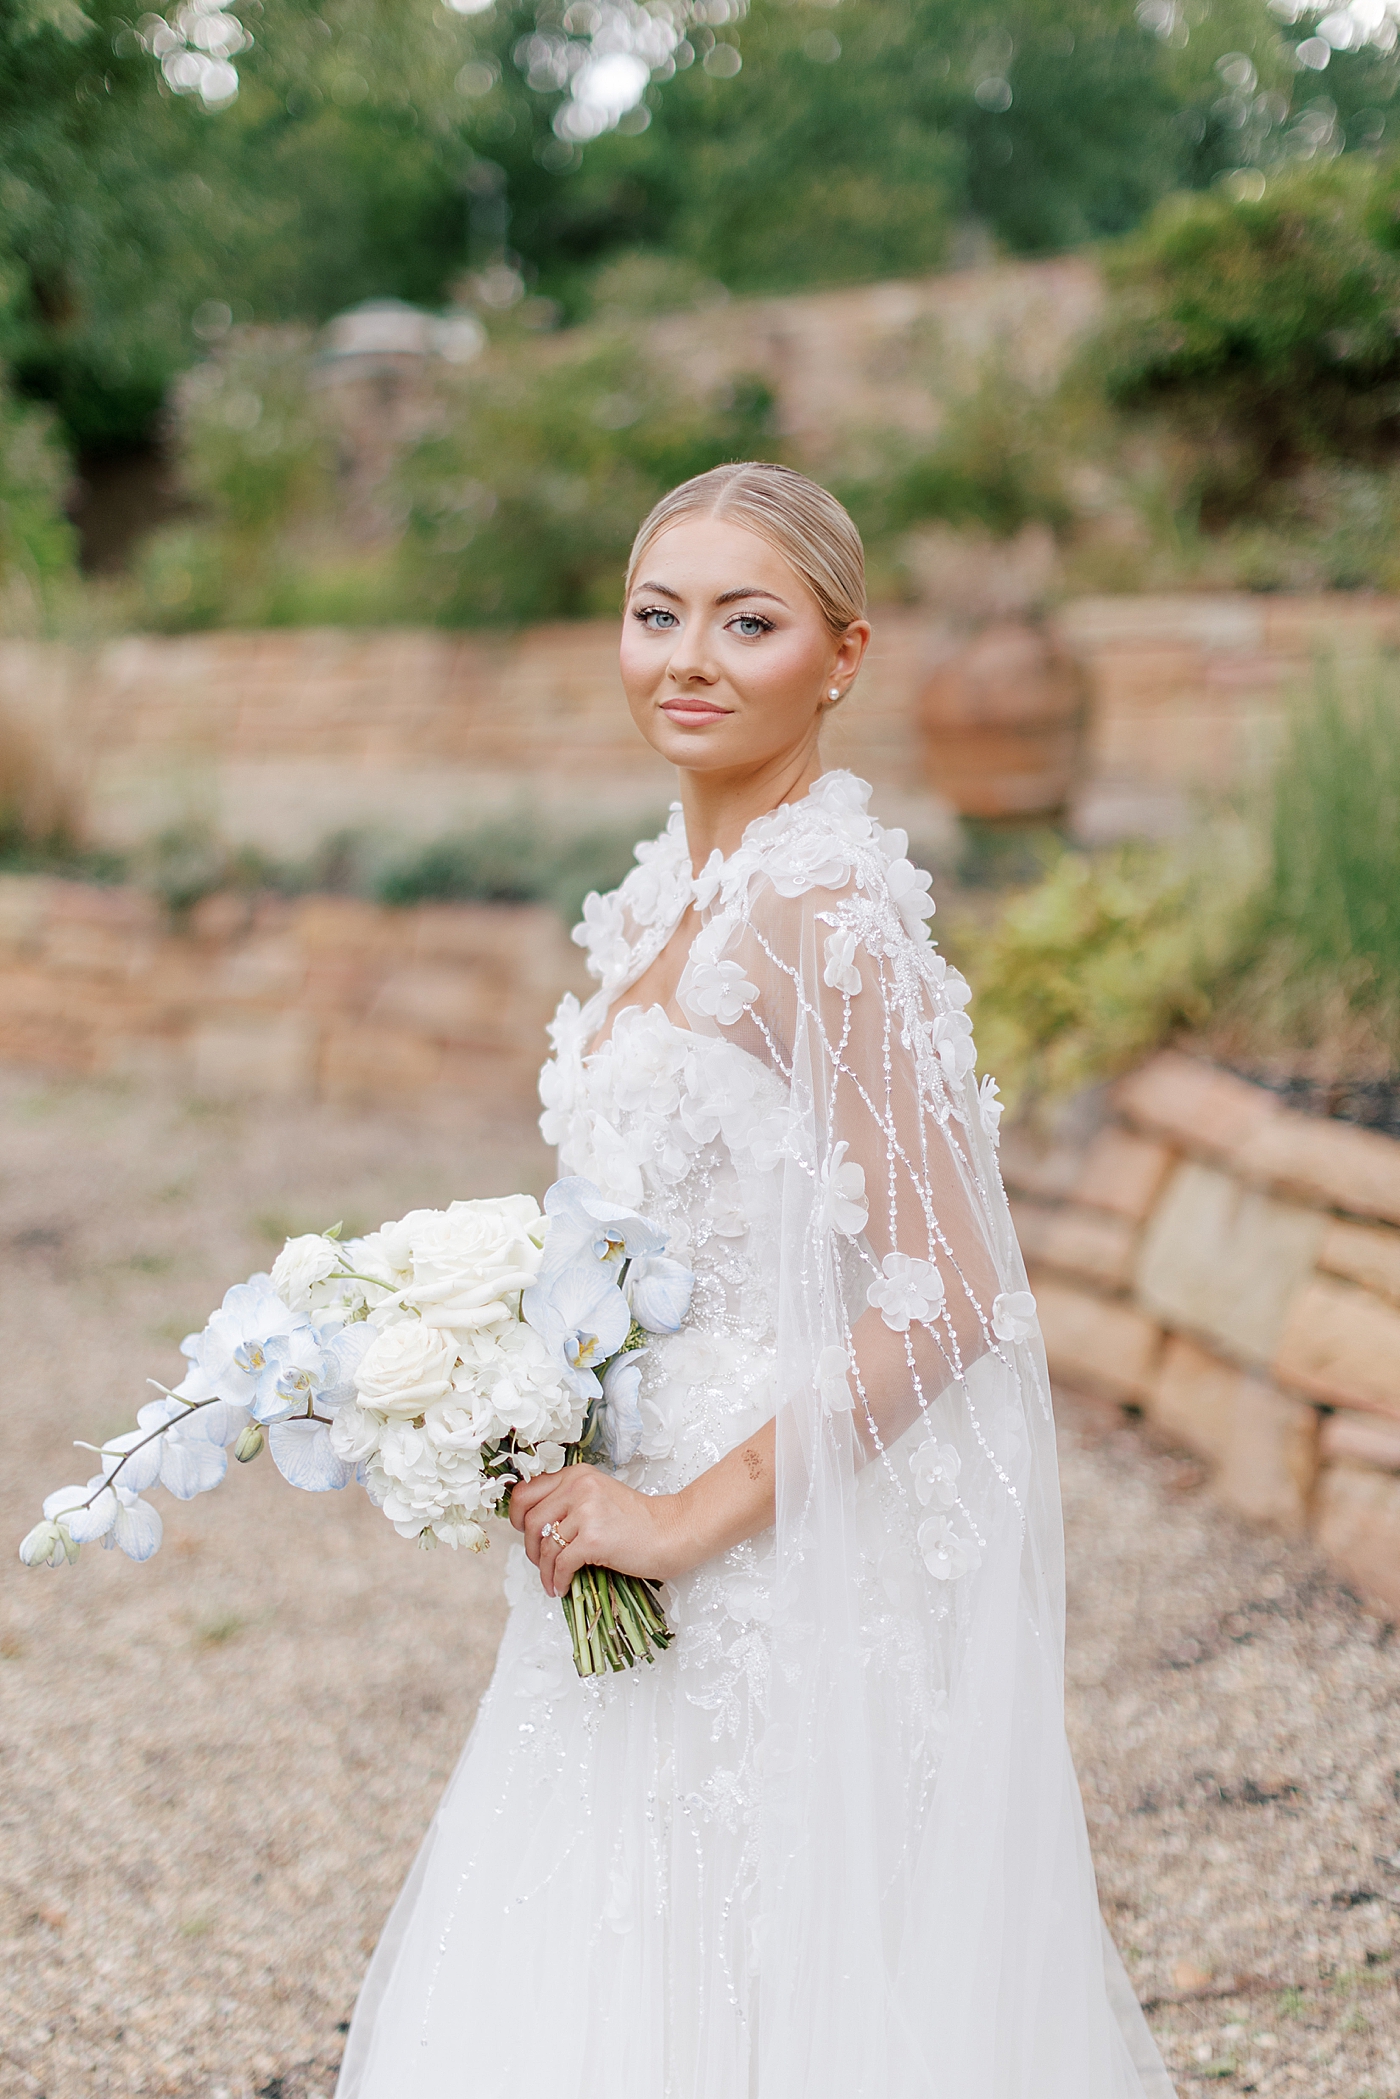 Bride with bouquet looking over her shoulder | Image by Hope Helmuth Photography